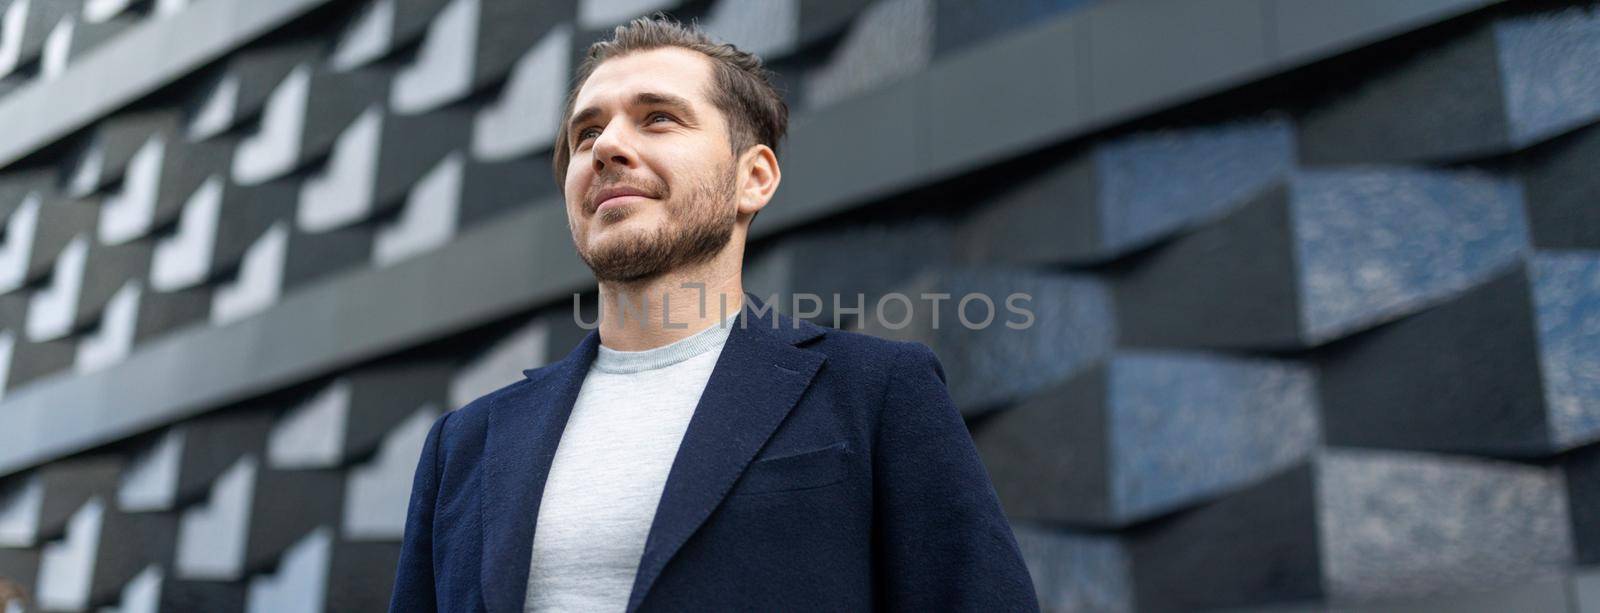 close-up portrait of a serious businessman against the background of the texture wall of the building by TRMK